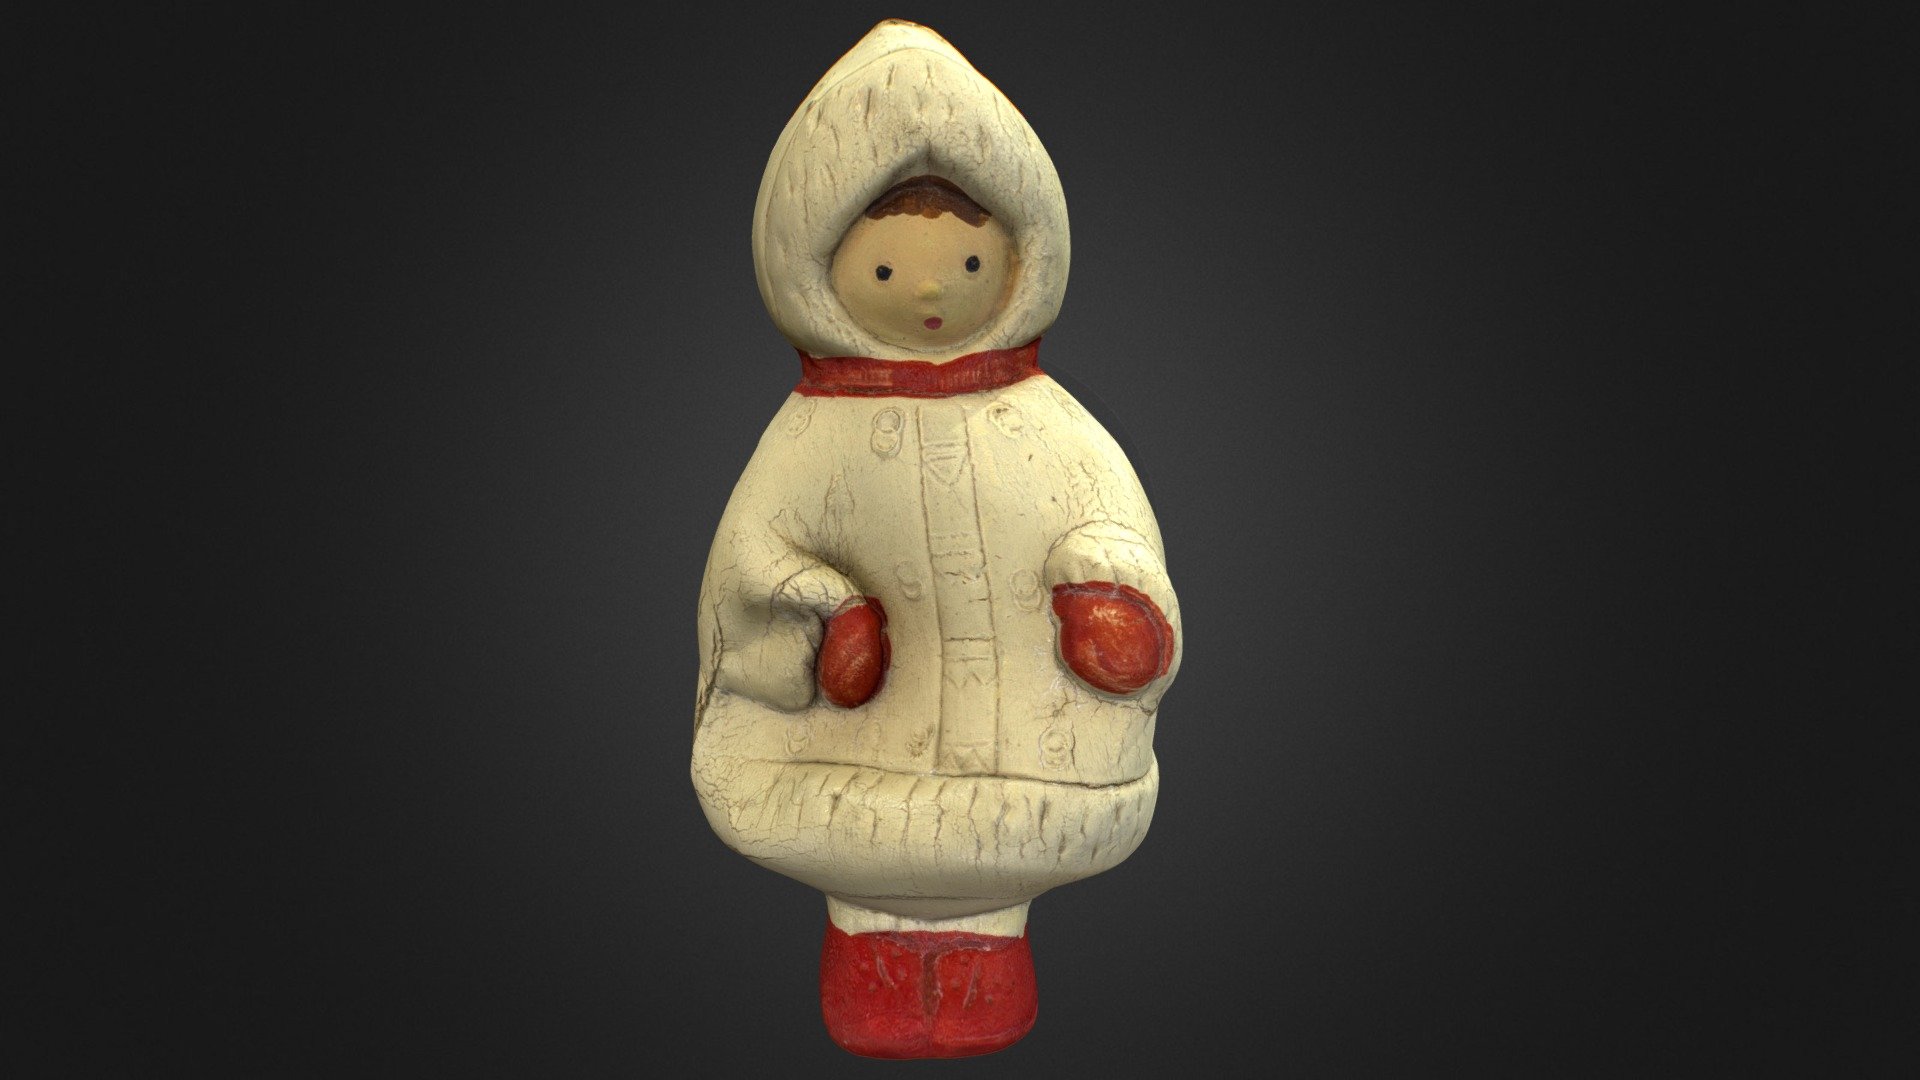 Old USSR Soviet Rubber Toy Child Scan High Poly

Including OBJ formats and texture (8192x8192) JPG

Polygons: 101000 Vertices: 50502 - Old USSR Soviet Rubber Toy Child - 3D model by Skeptic (@texturus) 3d model